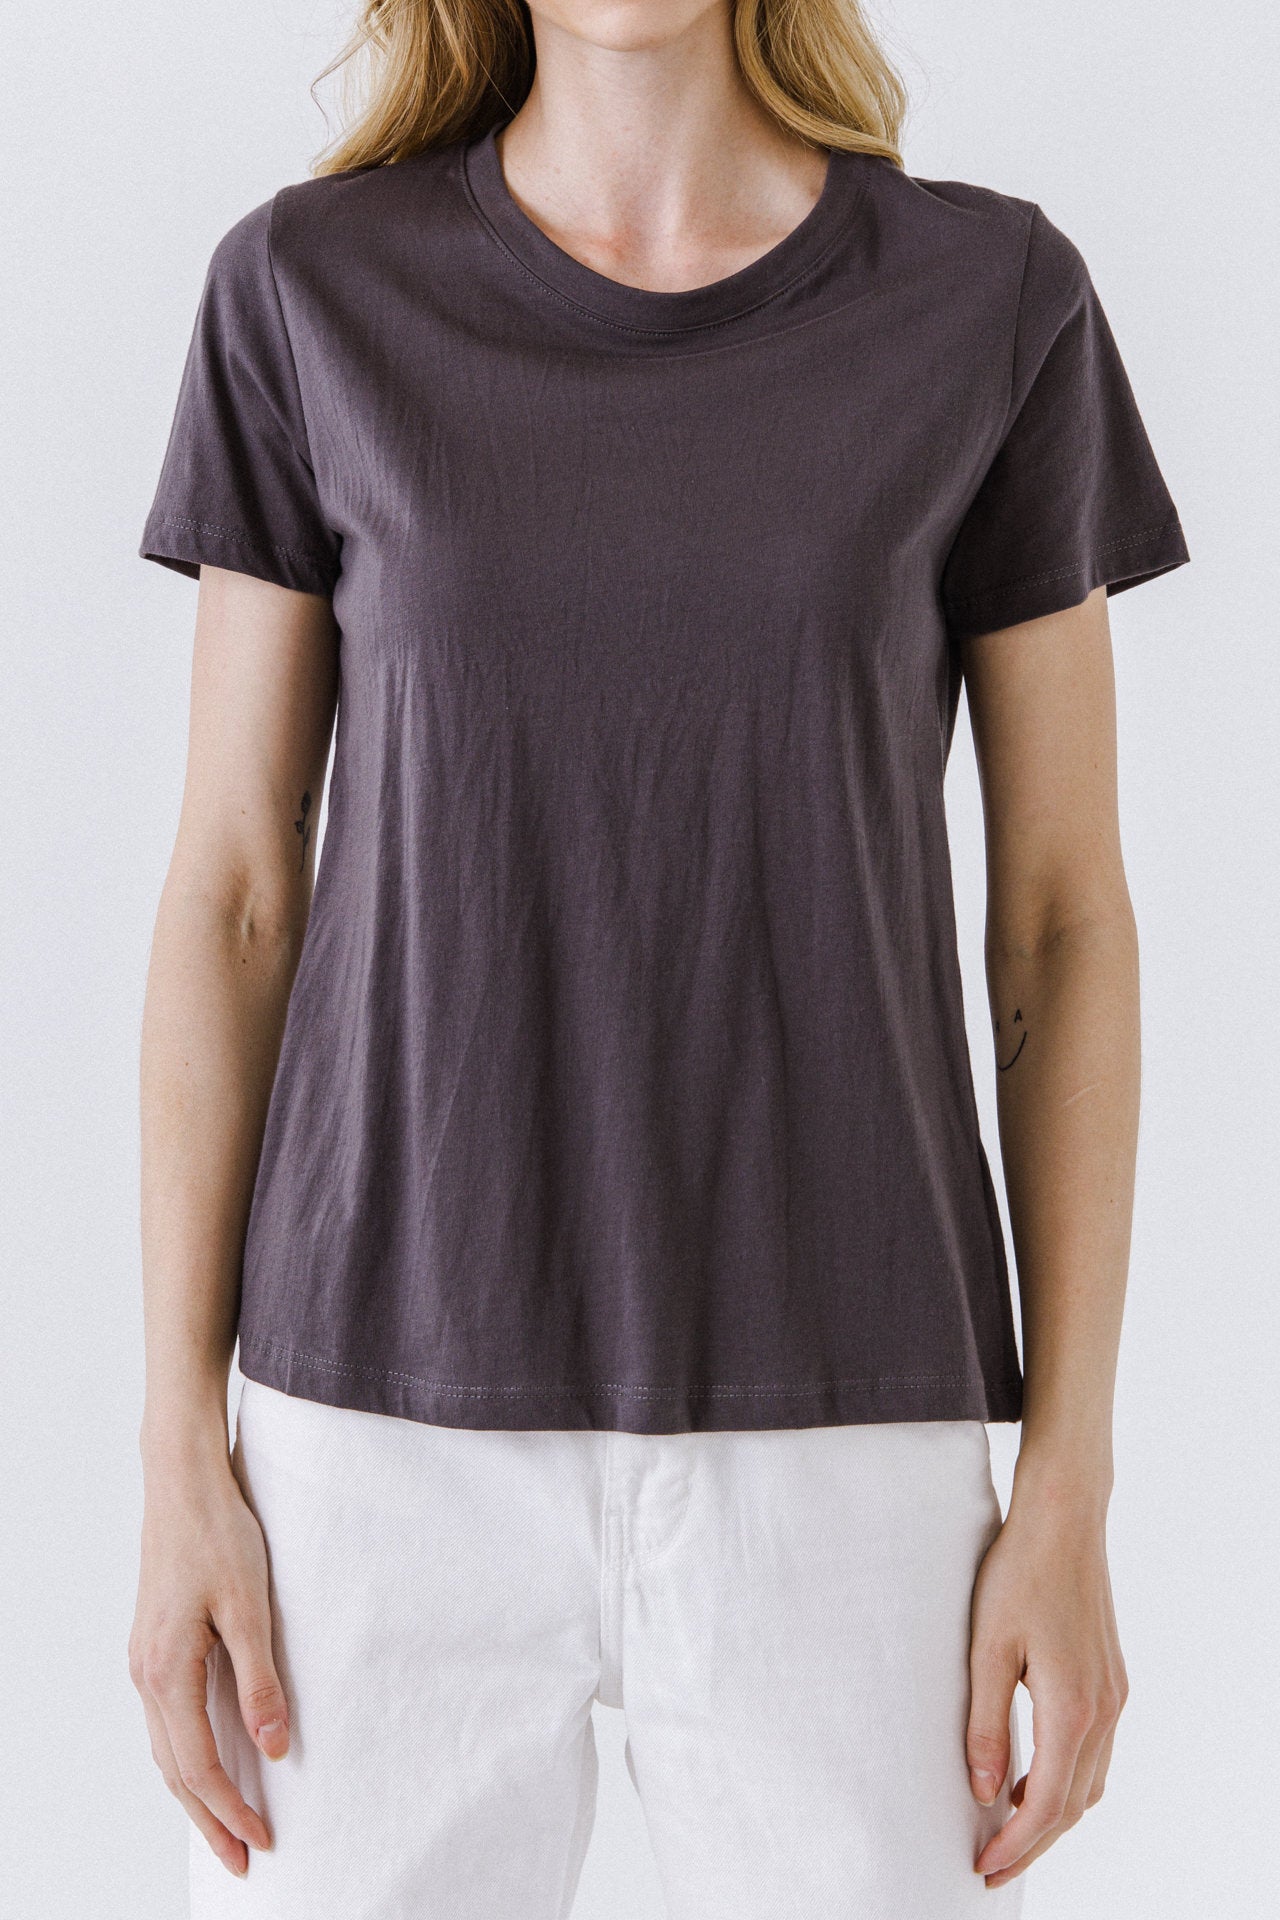 GREY LAB - Classic Round Neck Tee - T-SHIRTS available at Objectrare